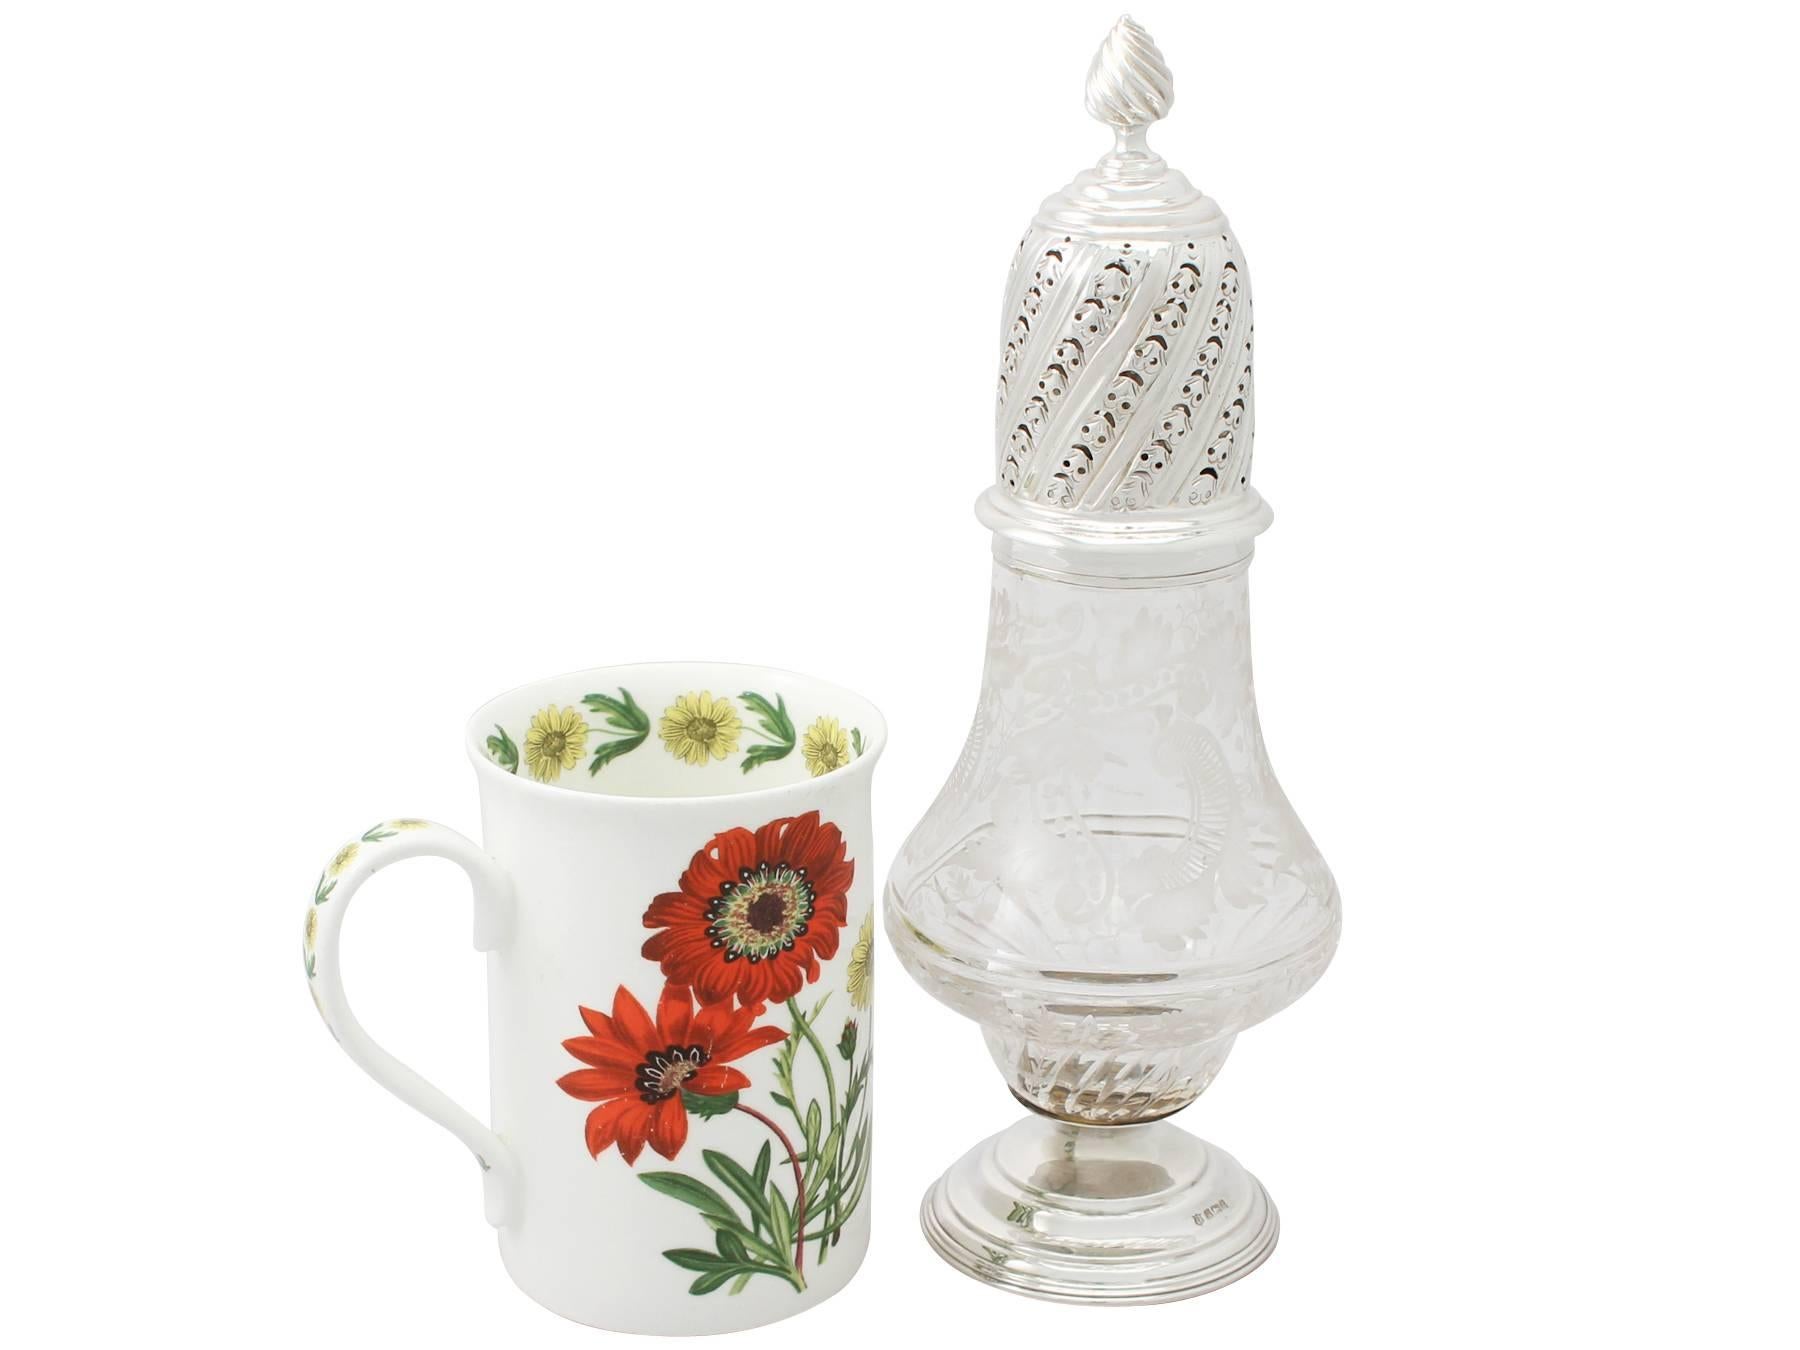 A fine and impressive antique Edwardian acid etched glass and English sterling silver mounted sugar caster; an addition to our silver teaware collection.

This fine antique Edwardian silver sugar caster has a baluster shaped form.

The upper